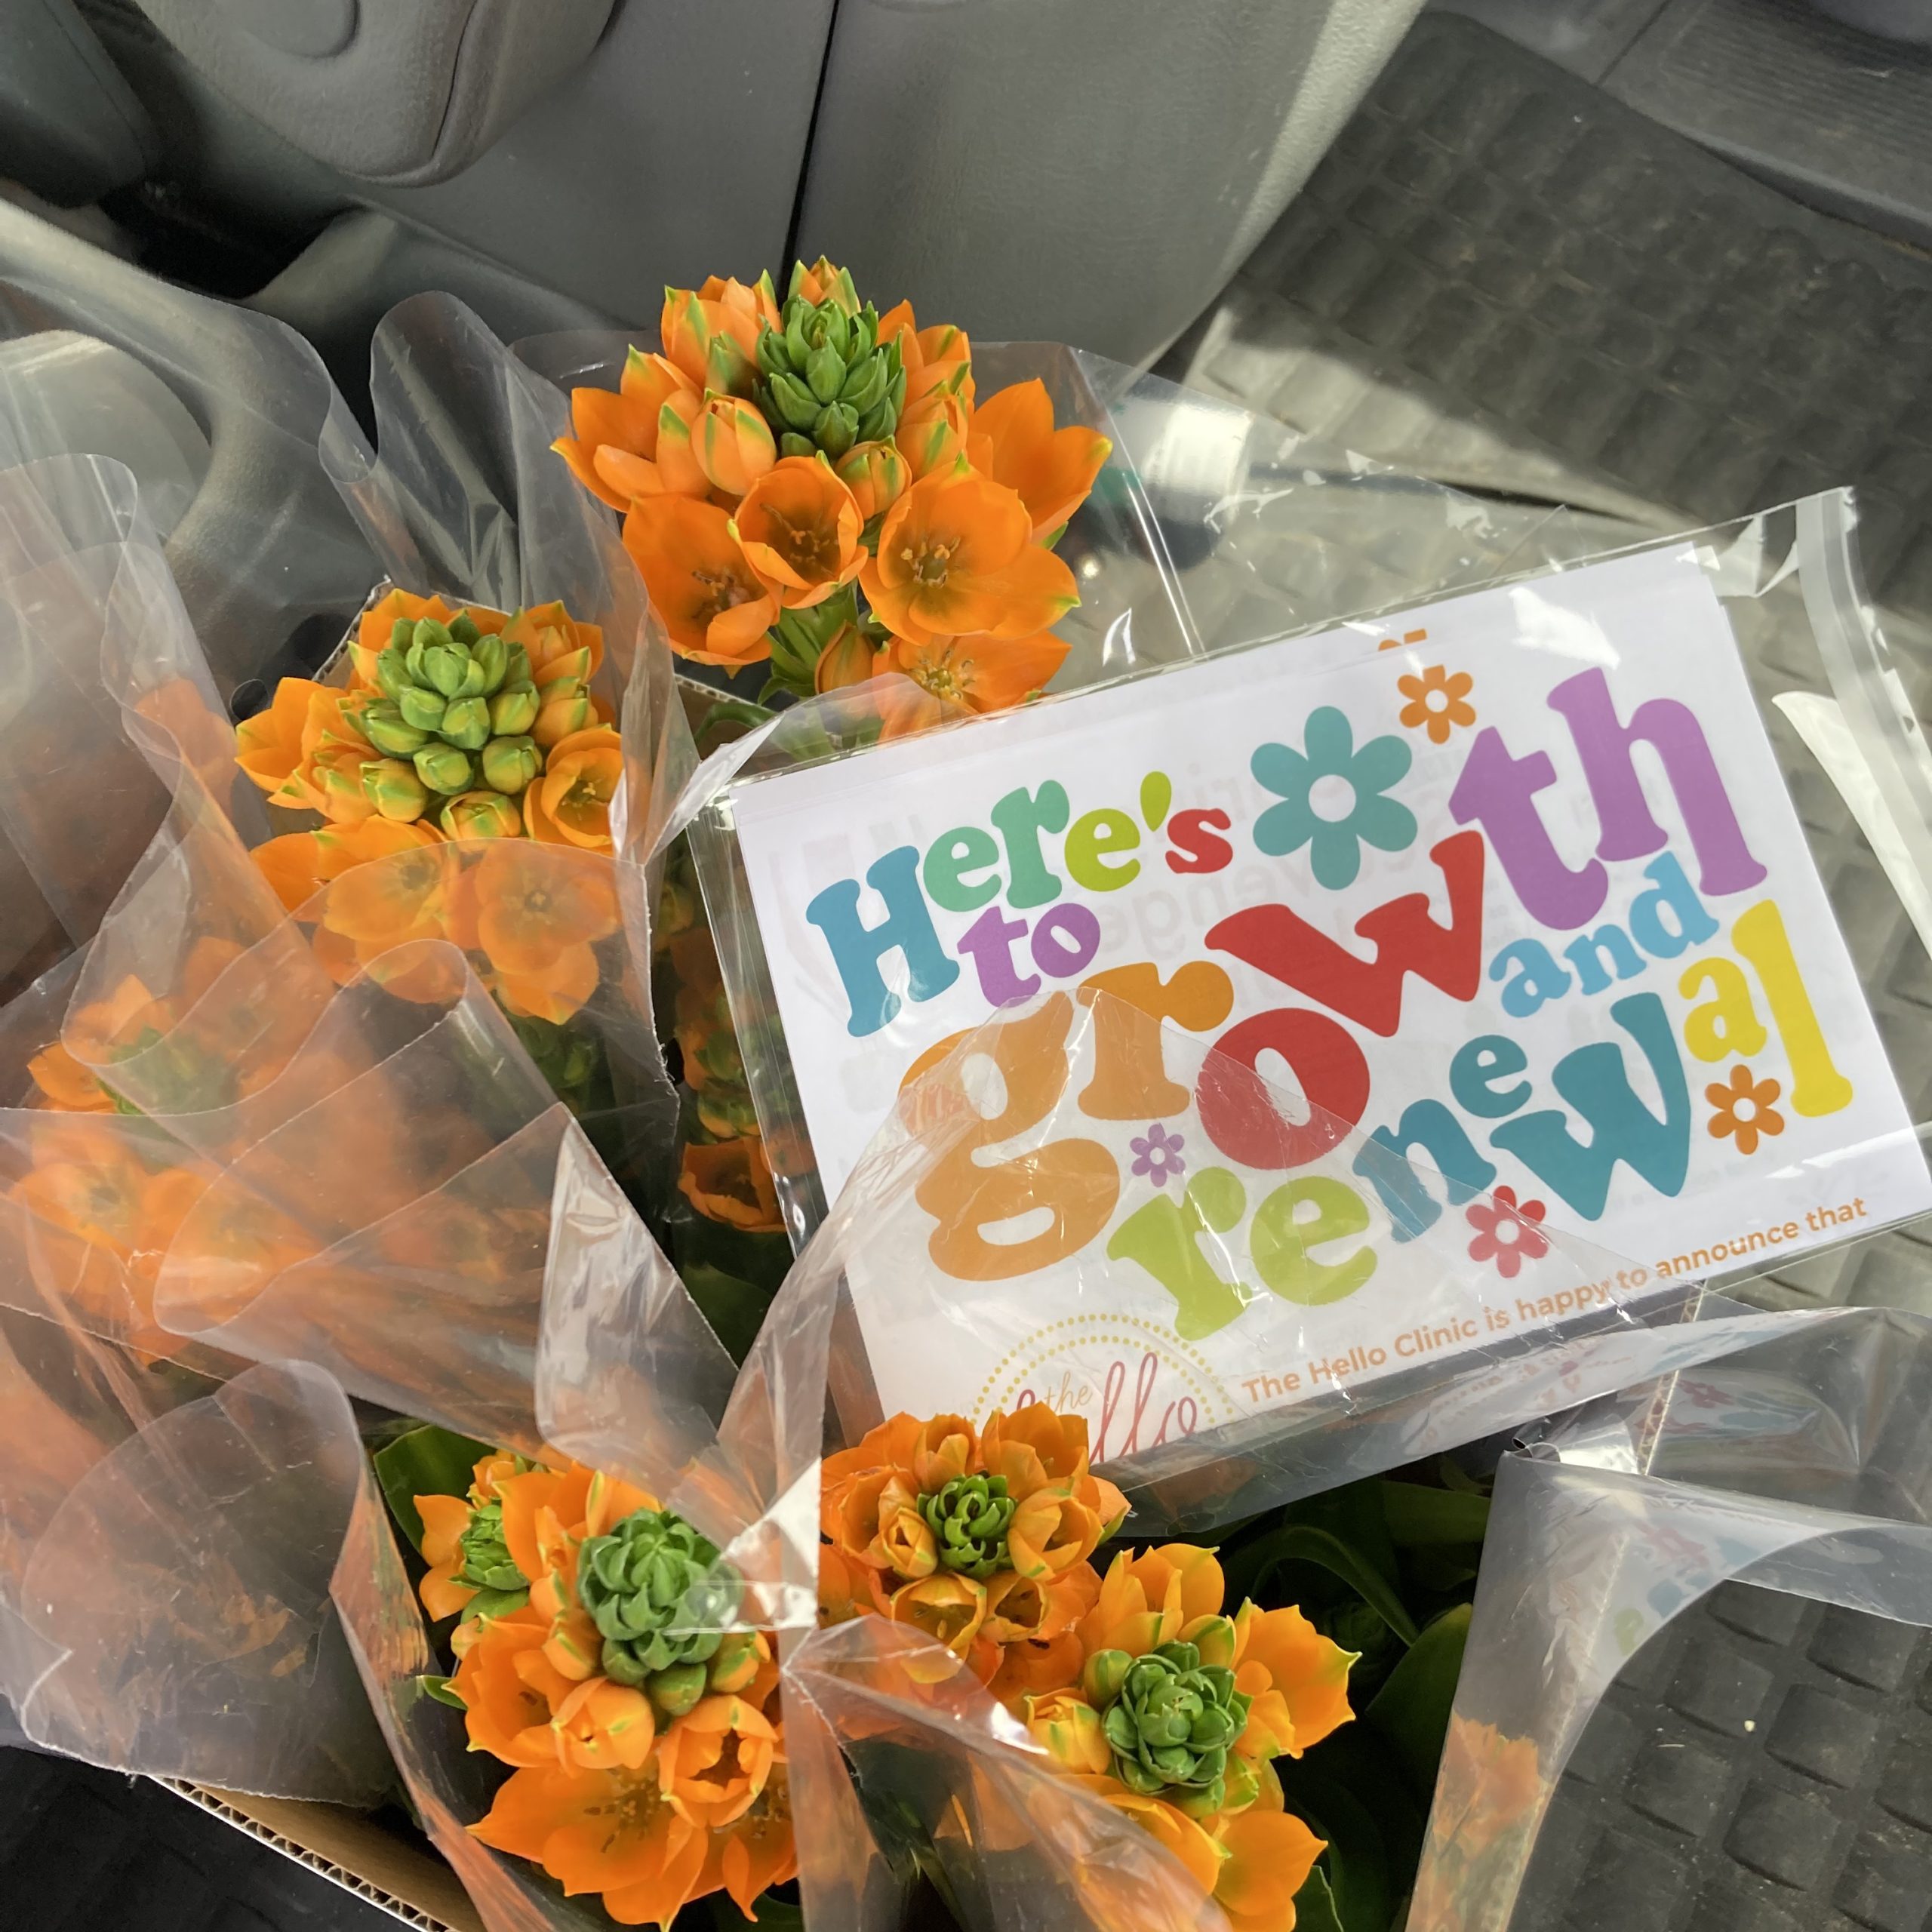 Orange flower bouquets with Growth and Renewal updates from The Hello Clinic for referring doctors' offices.